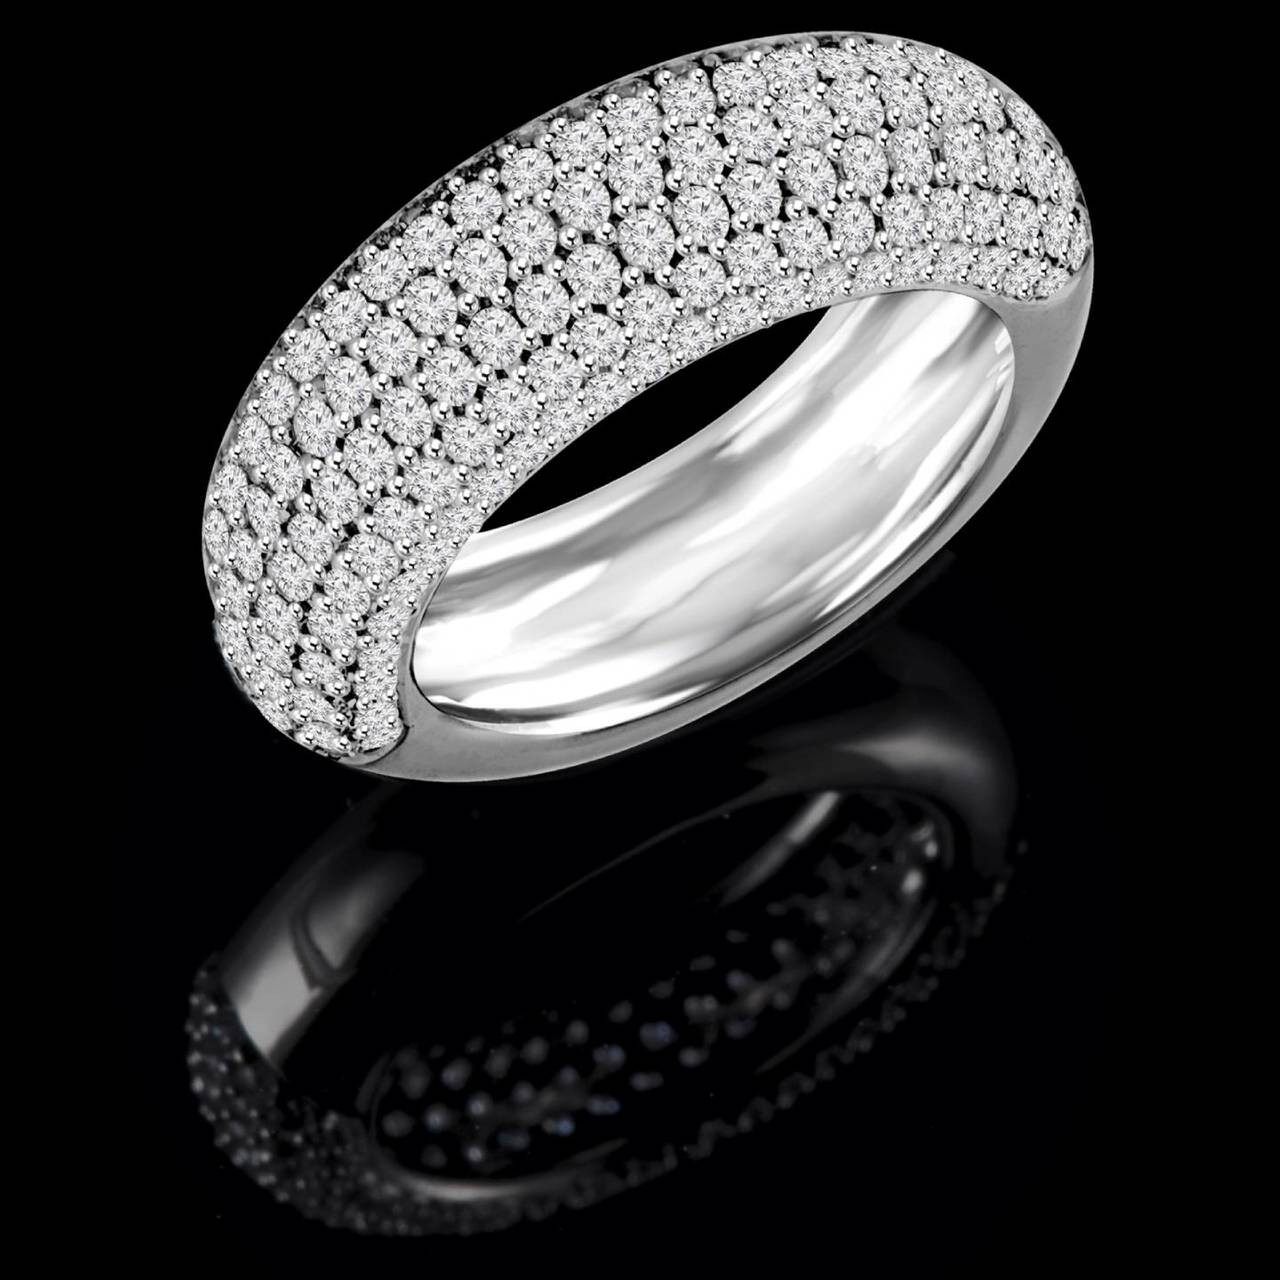 Pave Diamond Crossover Fashion Ring in 14k Gold (1.71 carat diamonds) –  Five Star Jewelry Brokers